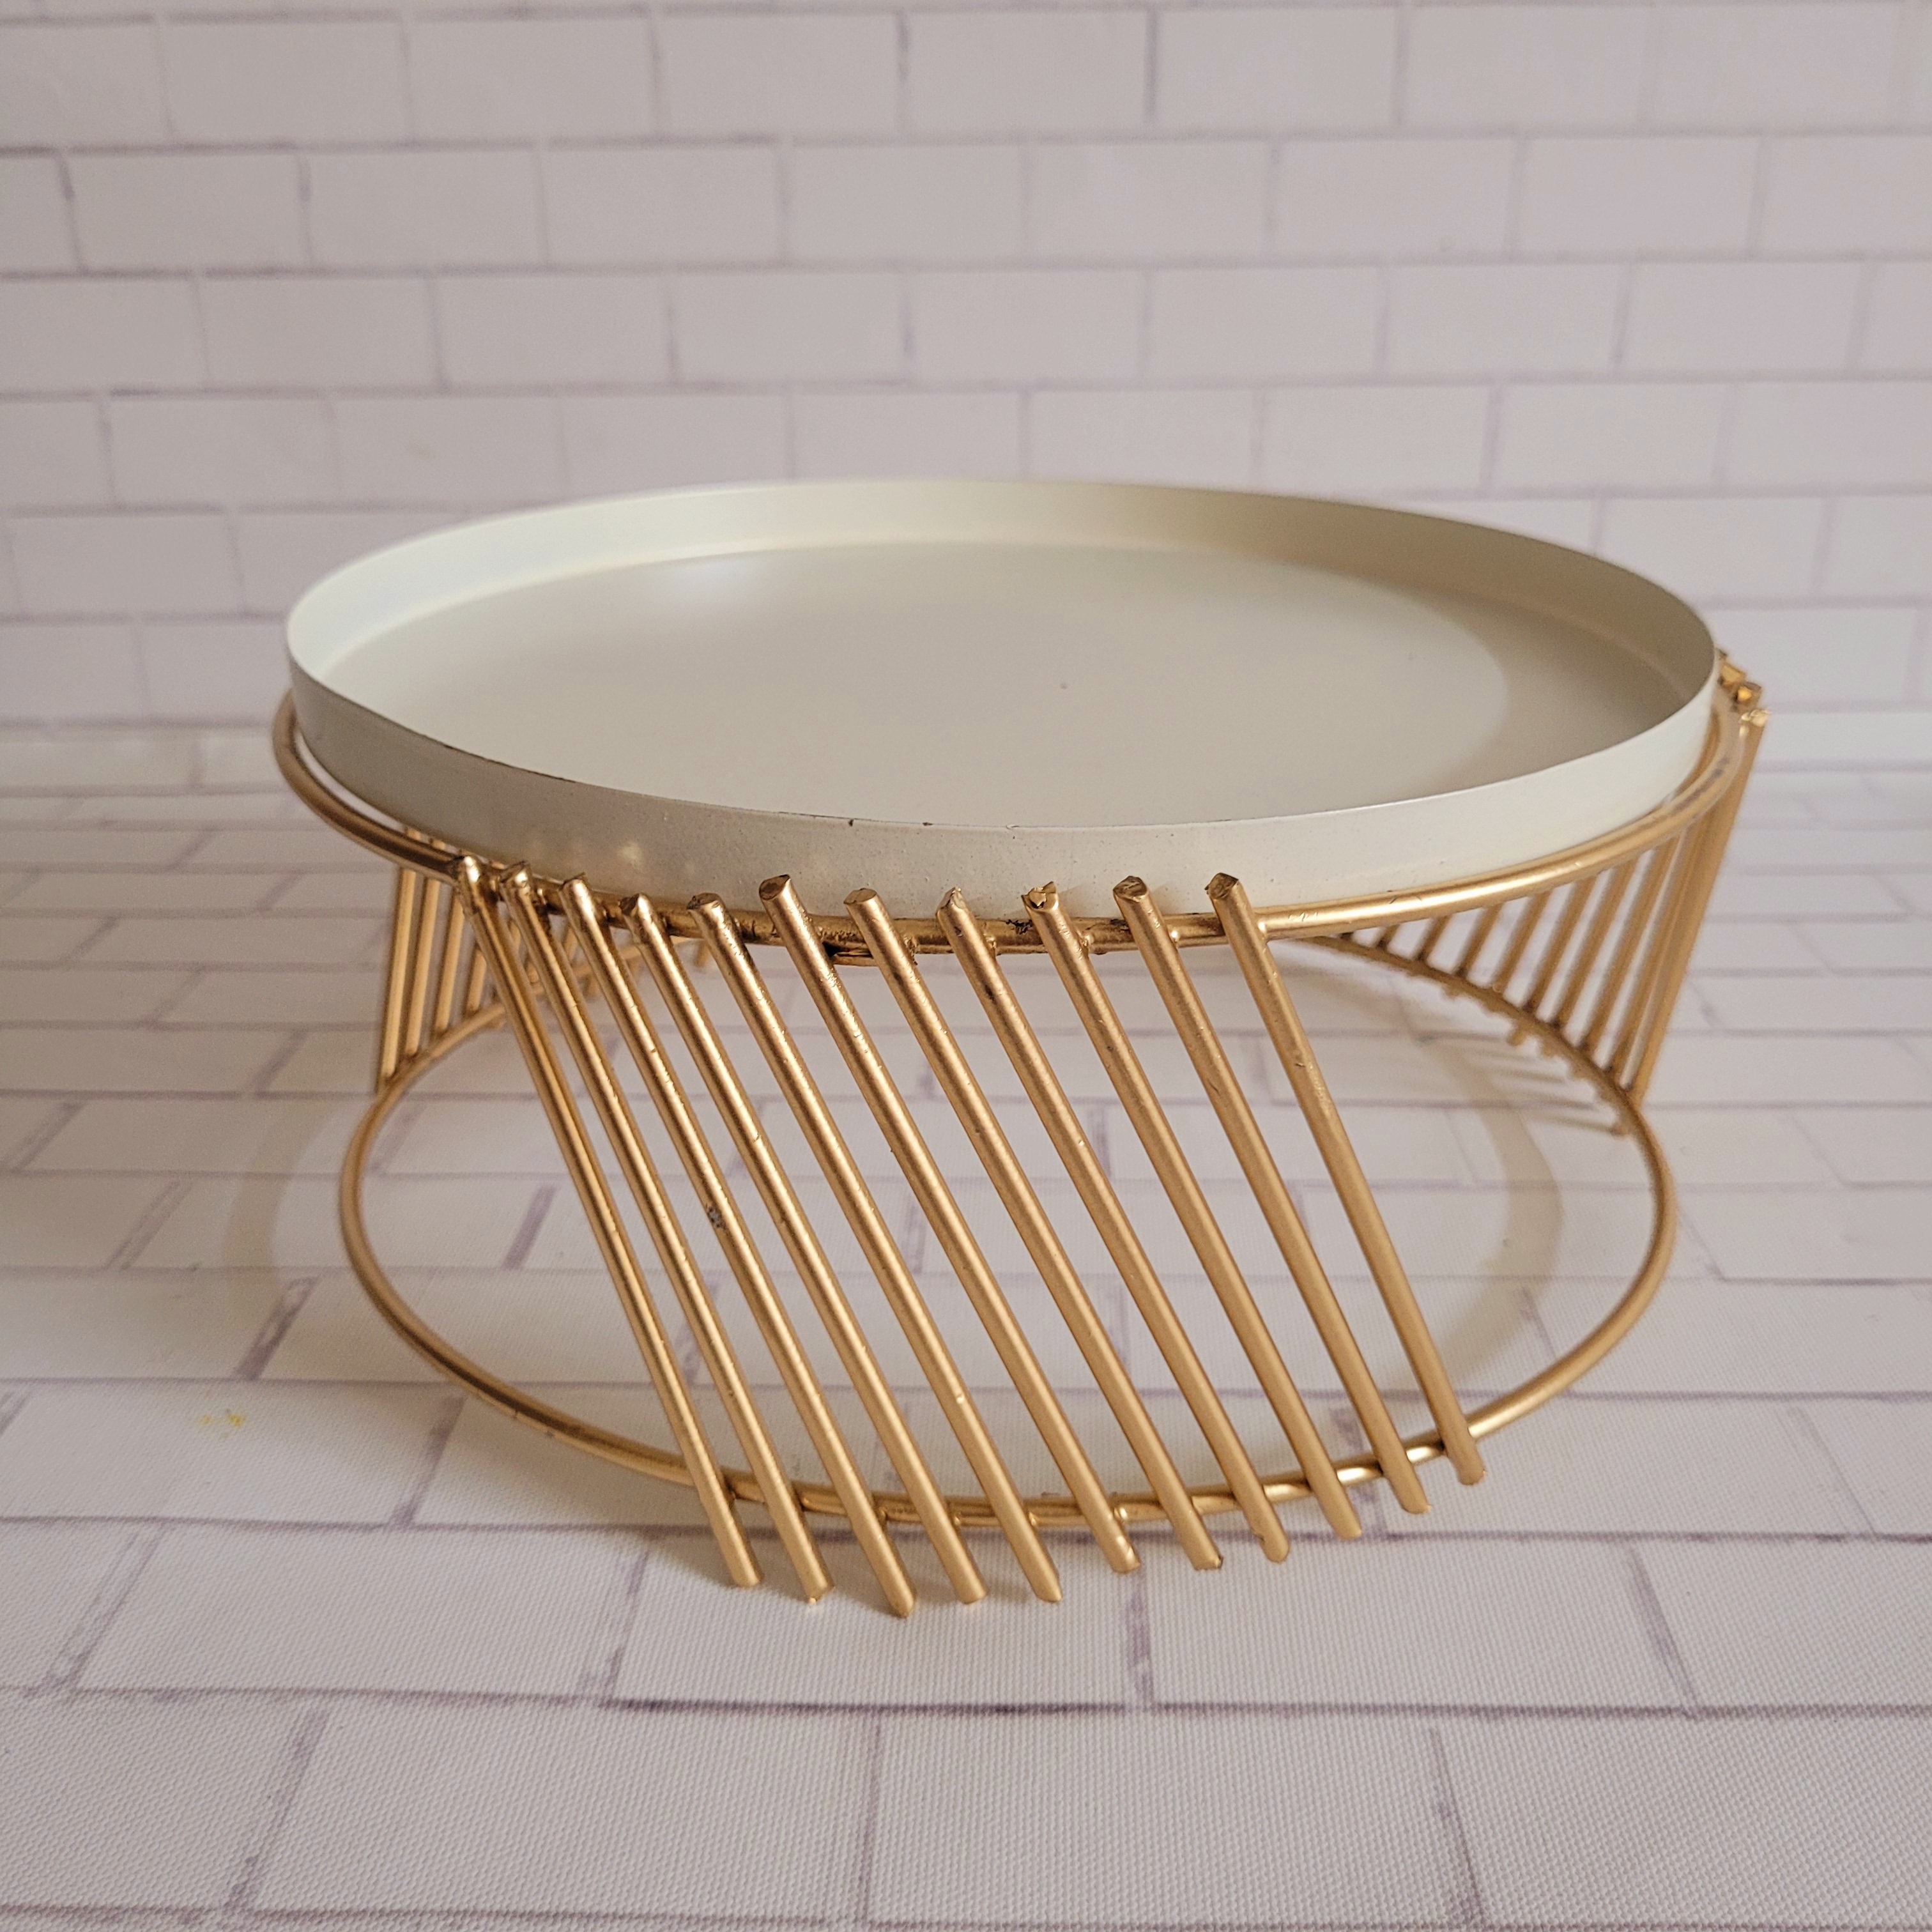 Floral art | White / Gold Cake Stand undefined